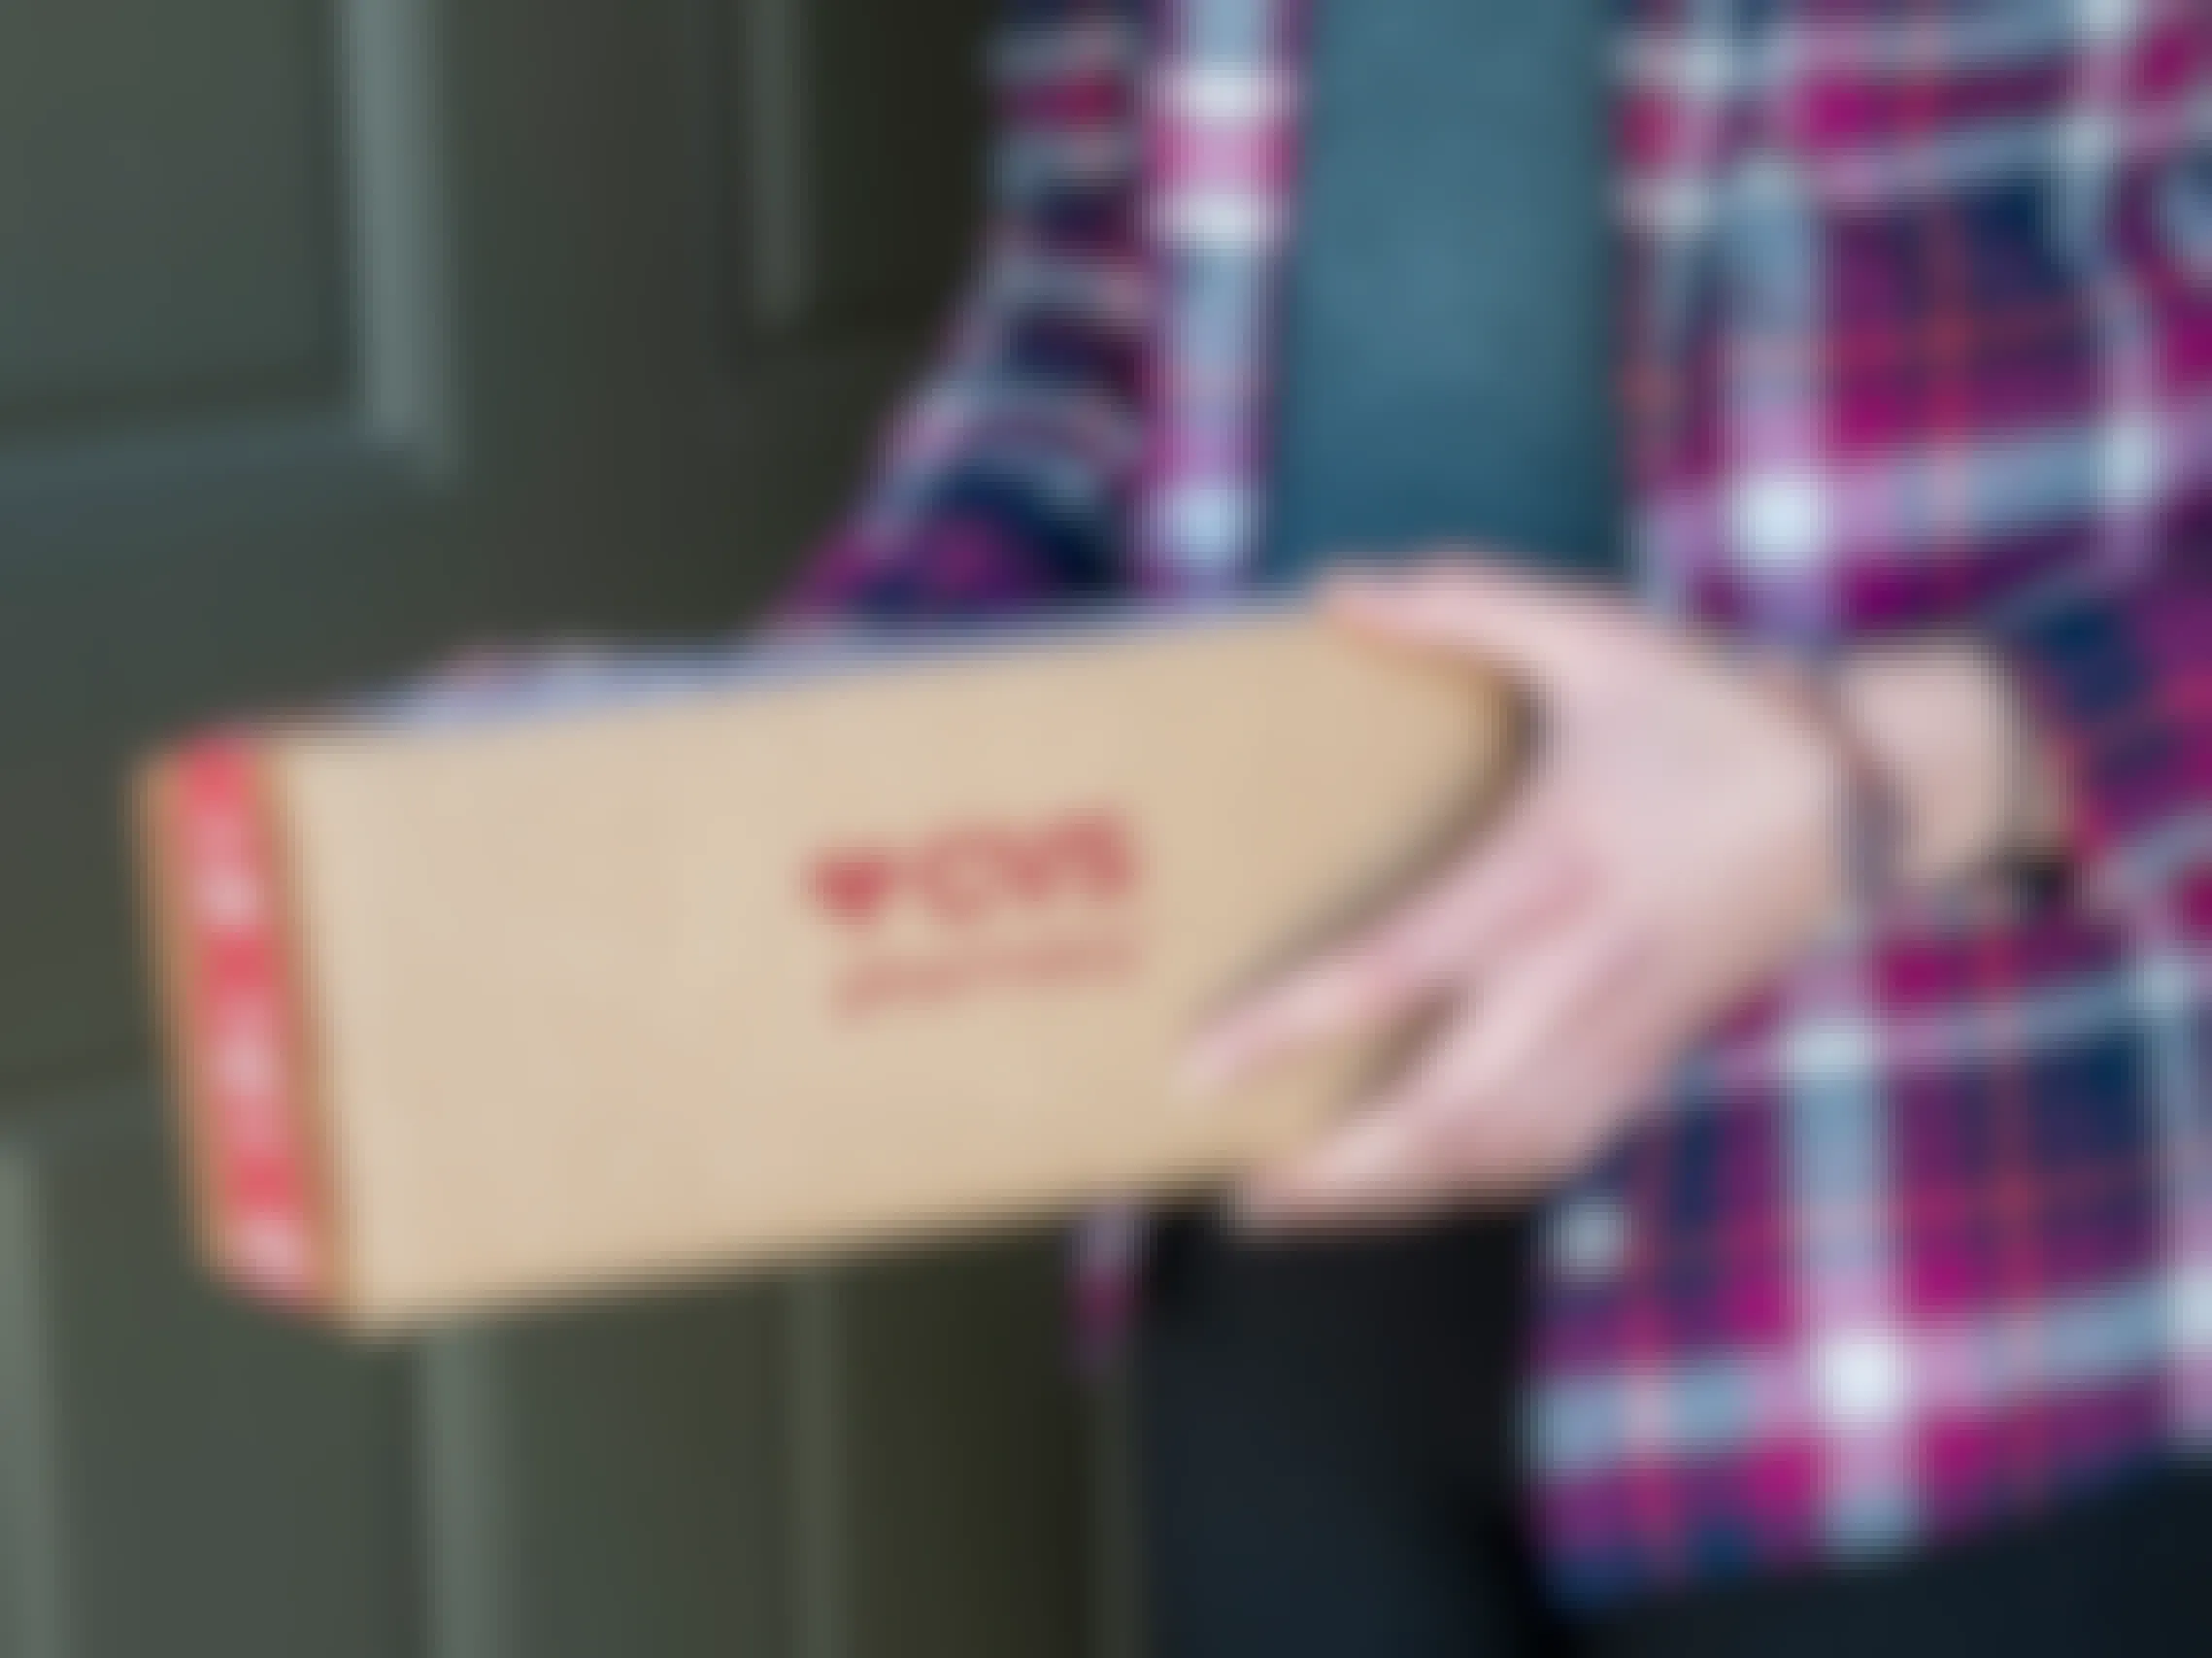 A person holding a CVS delivery box at a front door